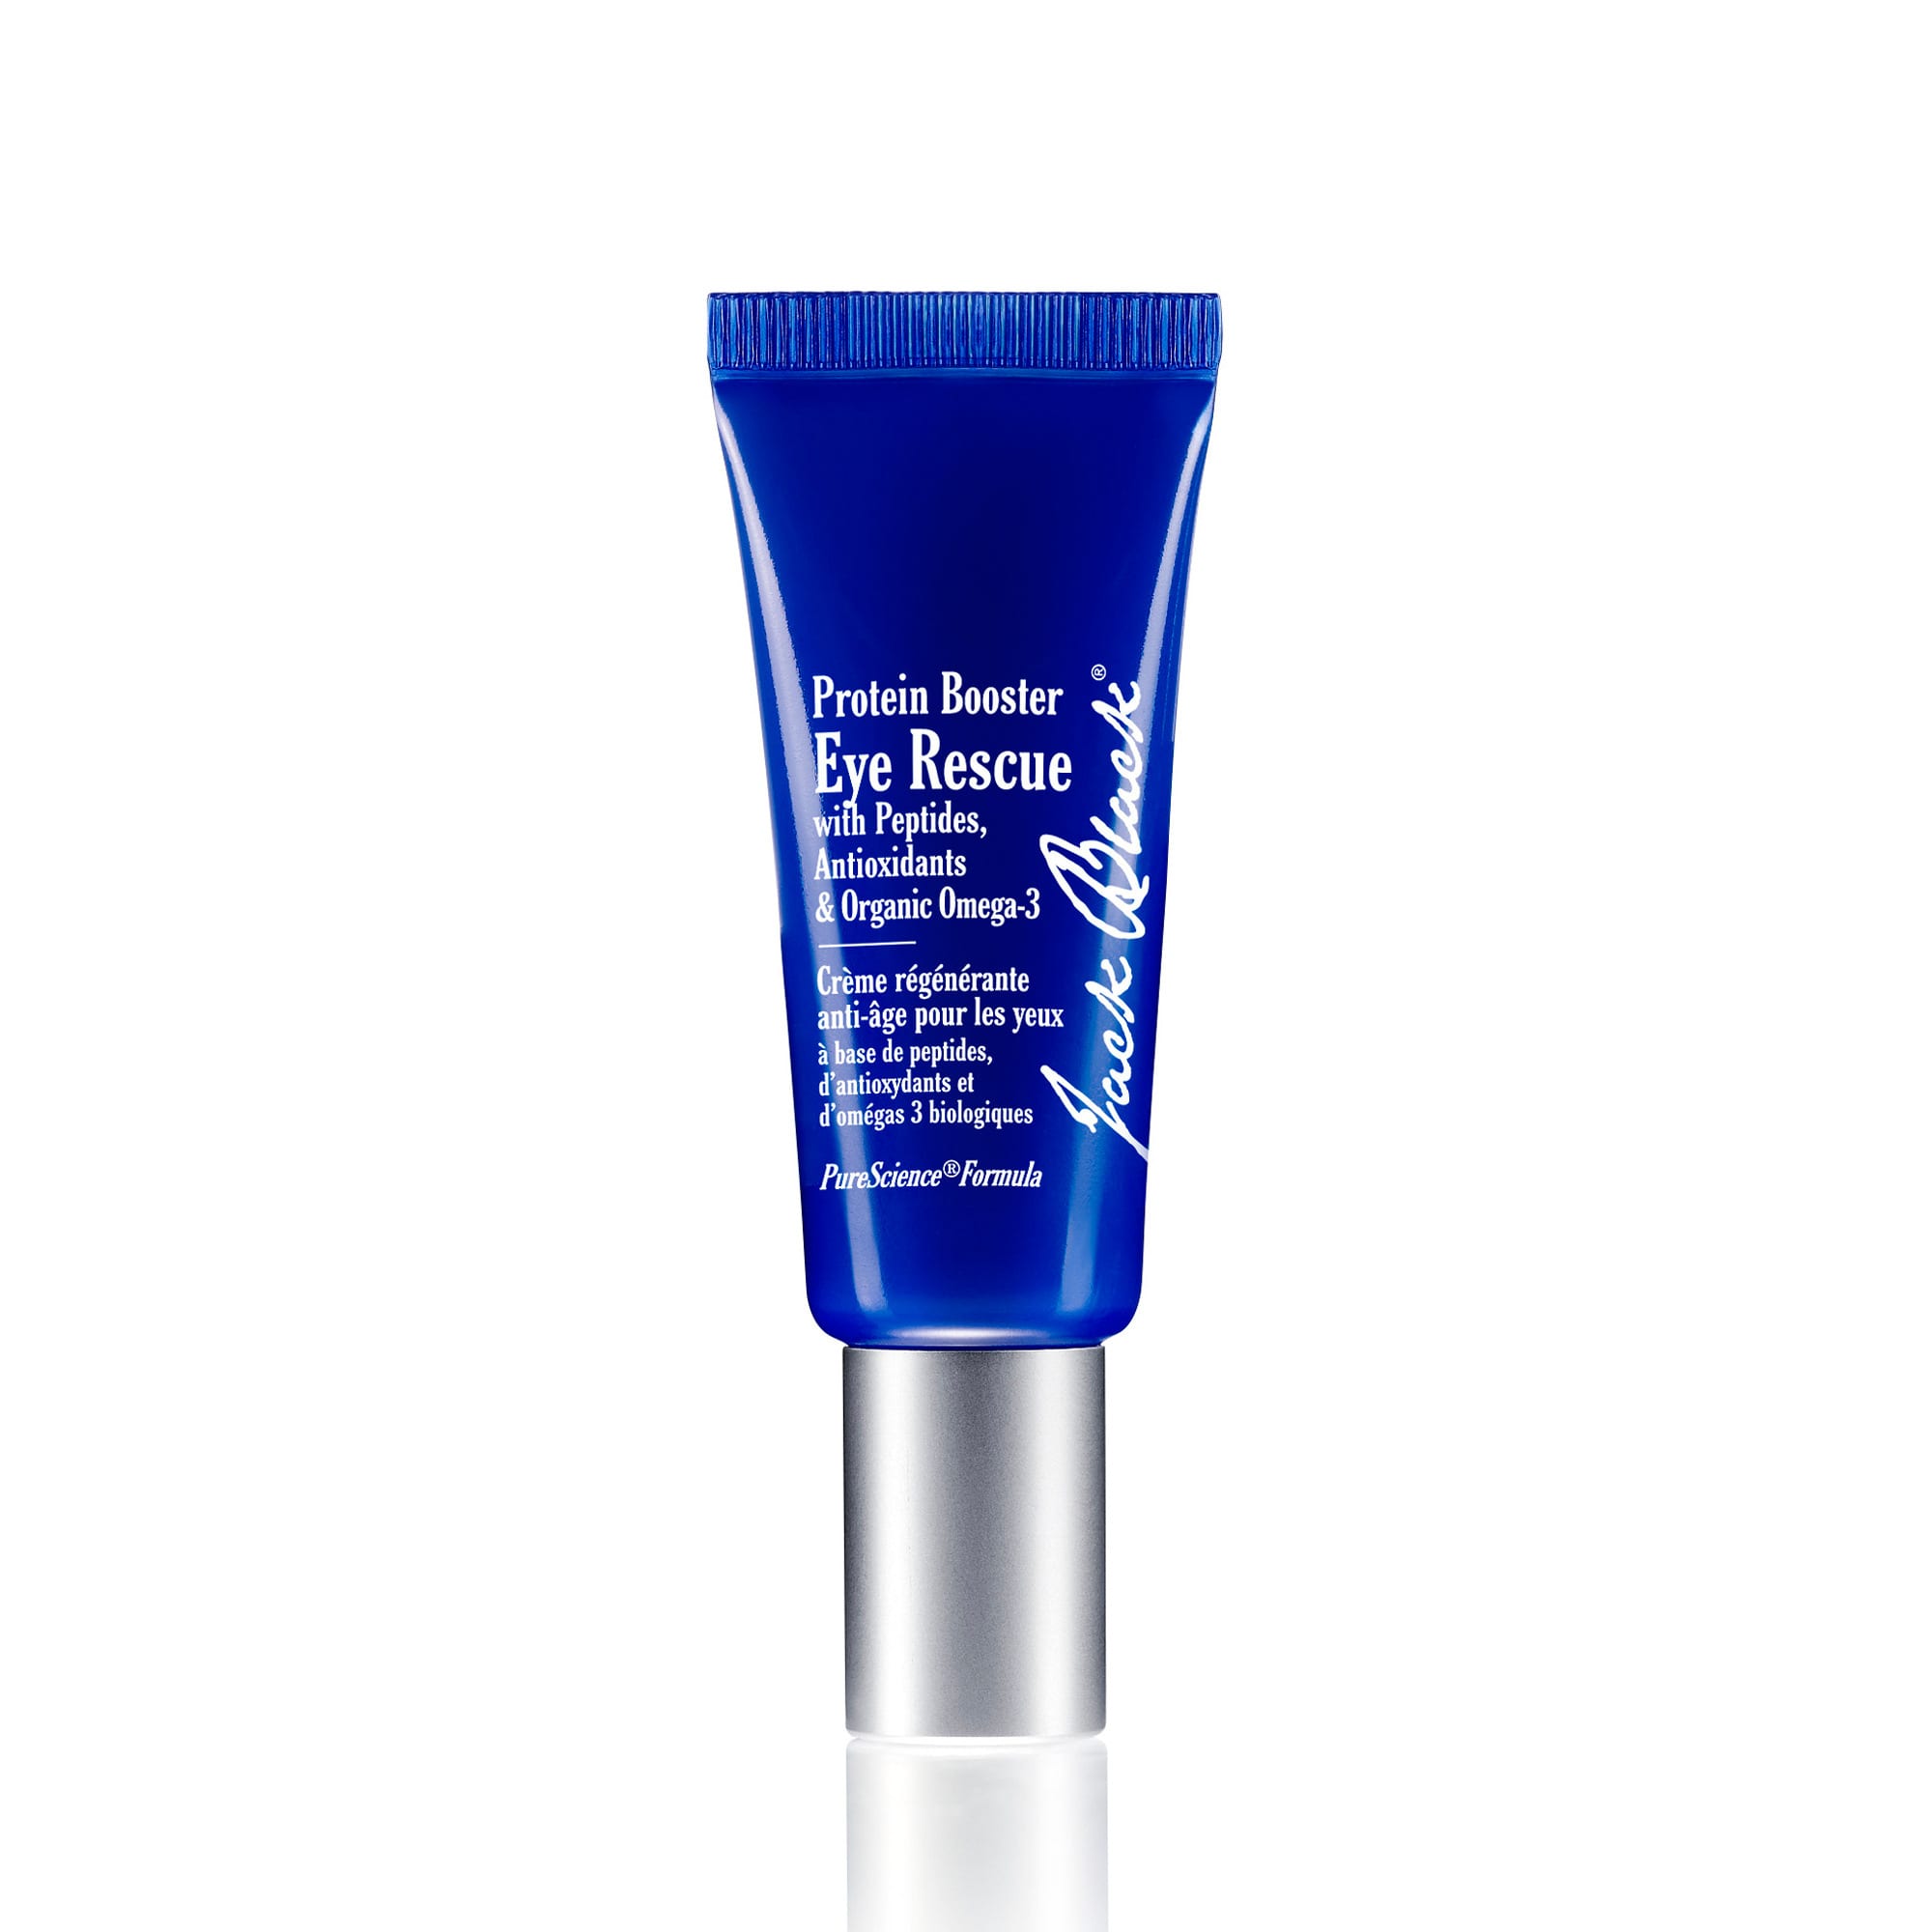 Protein Booster Eye Rescue With Peptides, 15 ml från Jack Black